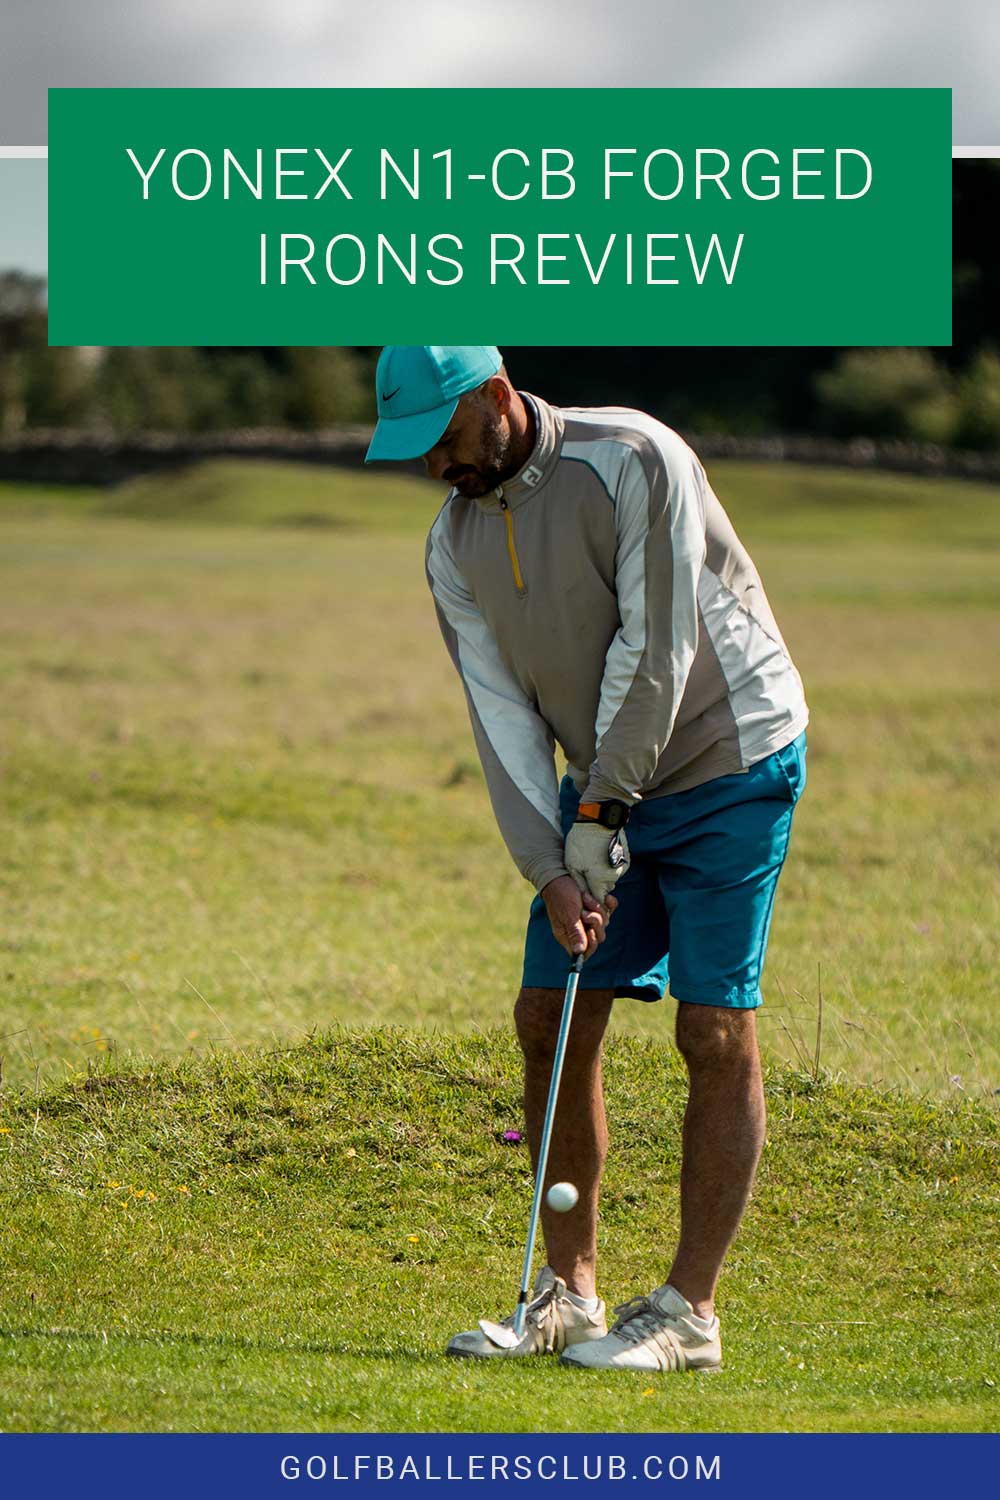 Man with blue cap playing golf - Yonex N1-Cb Forged Irons Review